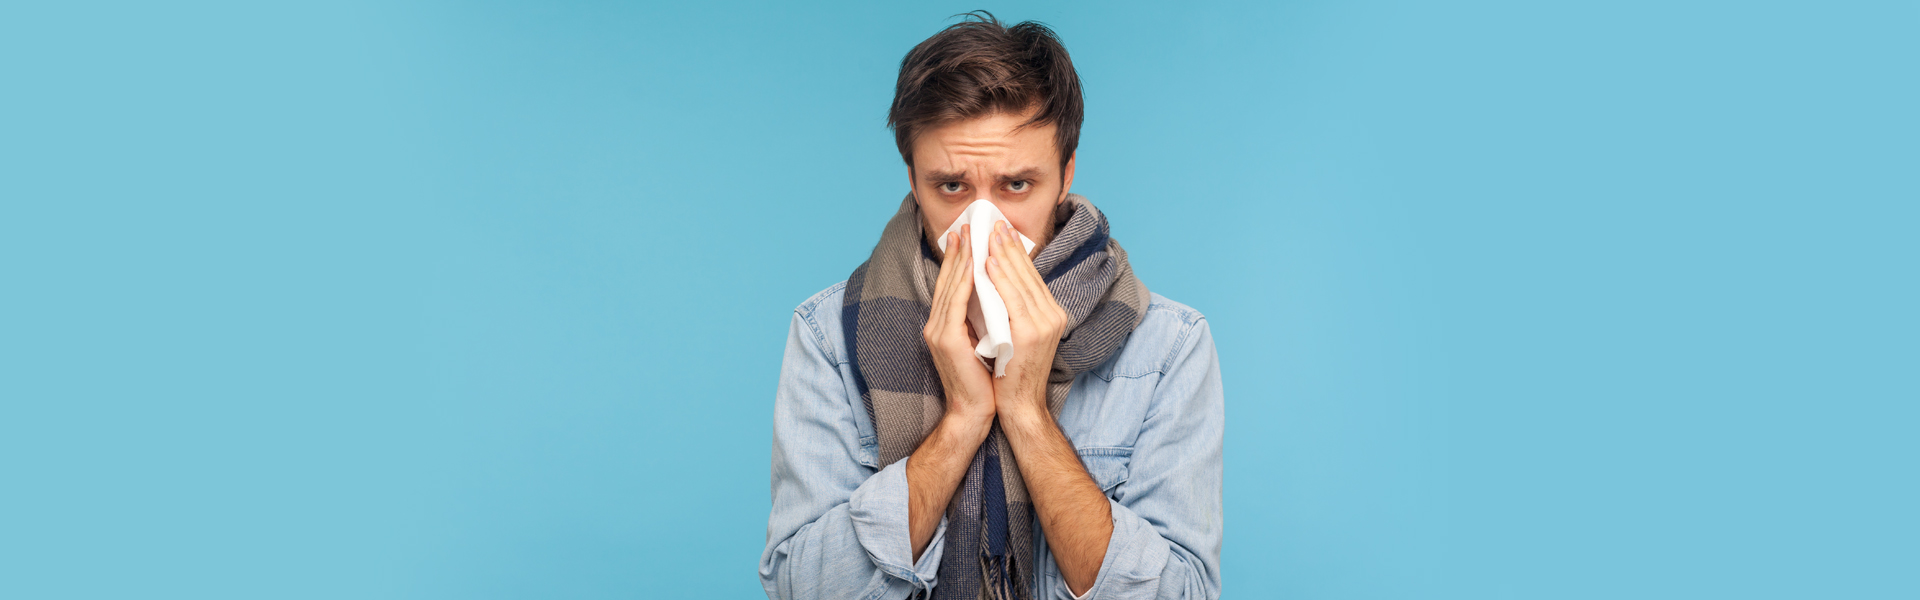 Should I Go to Urgent Care or the Emergency Room for Flu?